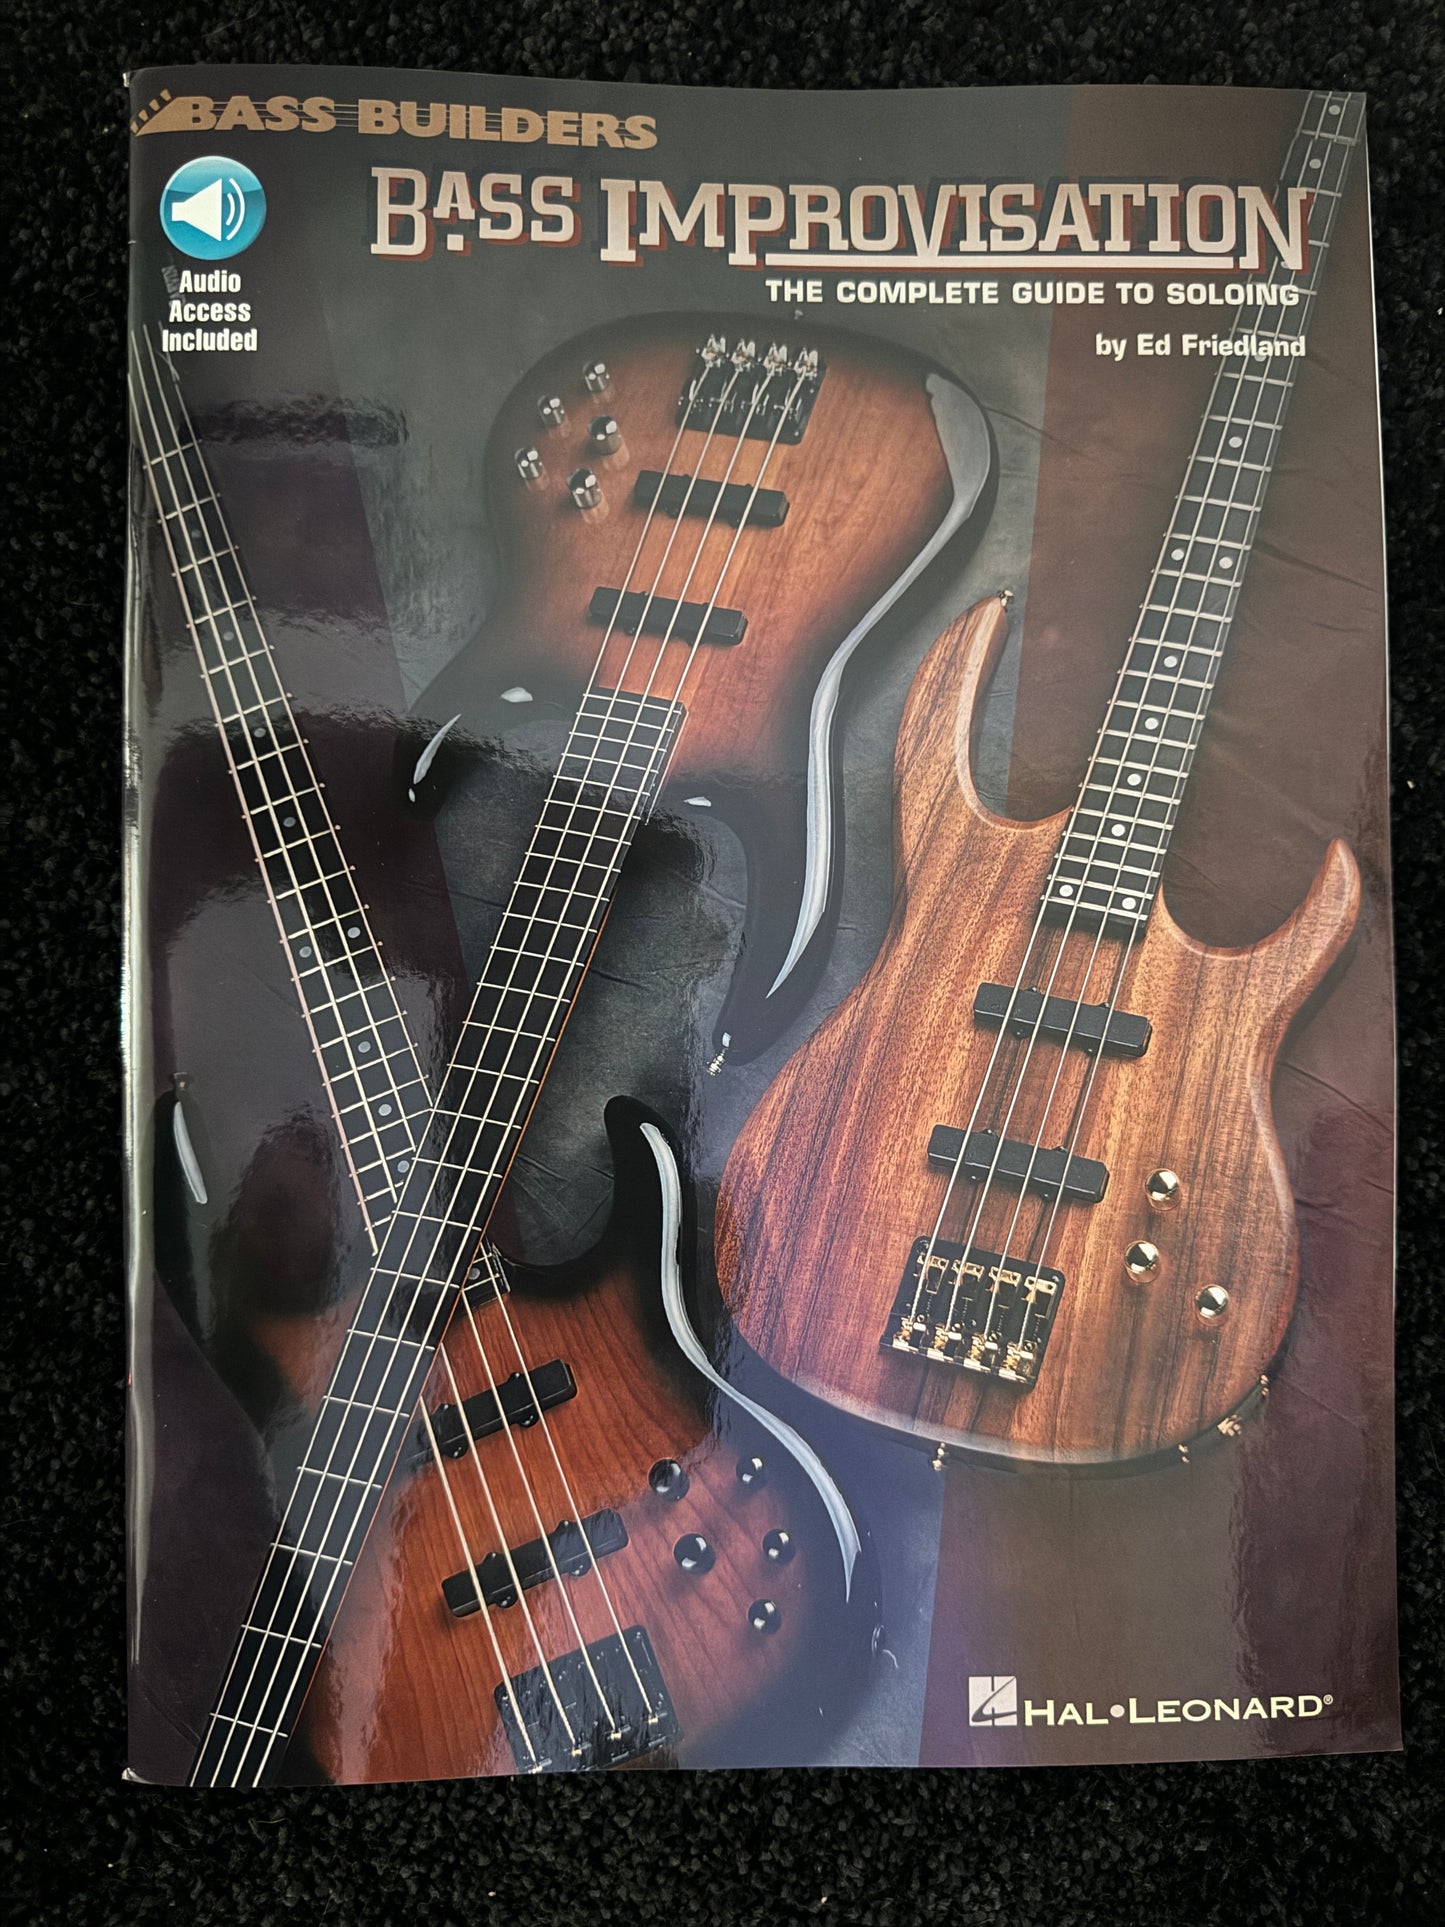 Bass Improvisation: The Complete Guide To Soloing by Ed Friedland